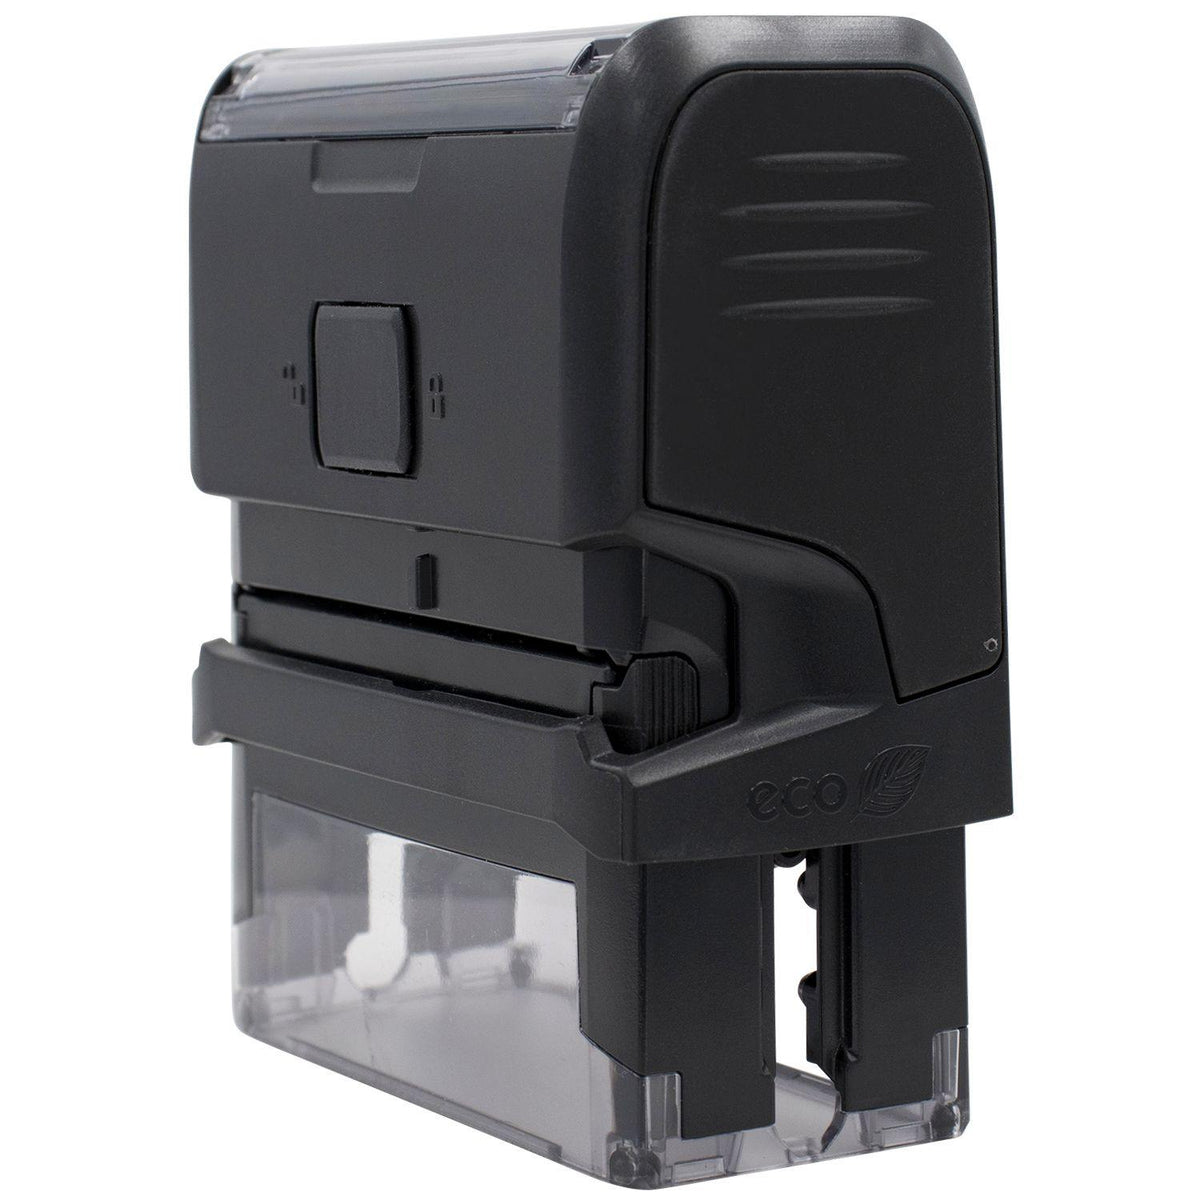 Large Self-Inking Curley Past Due Stamp - Engineer Seal Stamps - Brand_Trodat, Impression Size_Large, Stamp Type_Self-Inking Stamp, Type of Use_Finance, Type of Use_Office